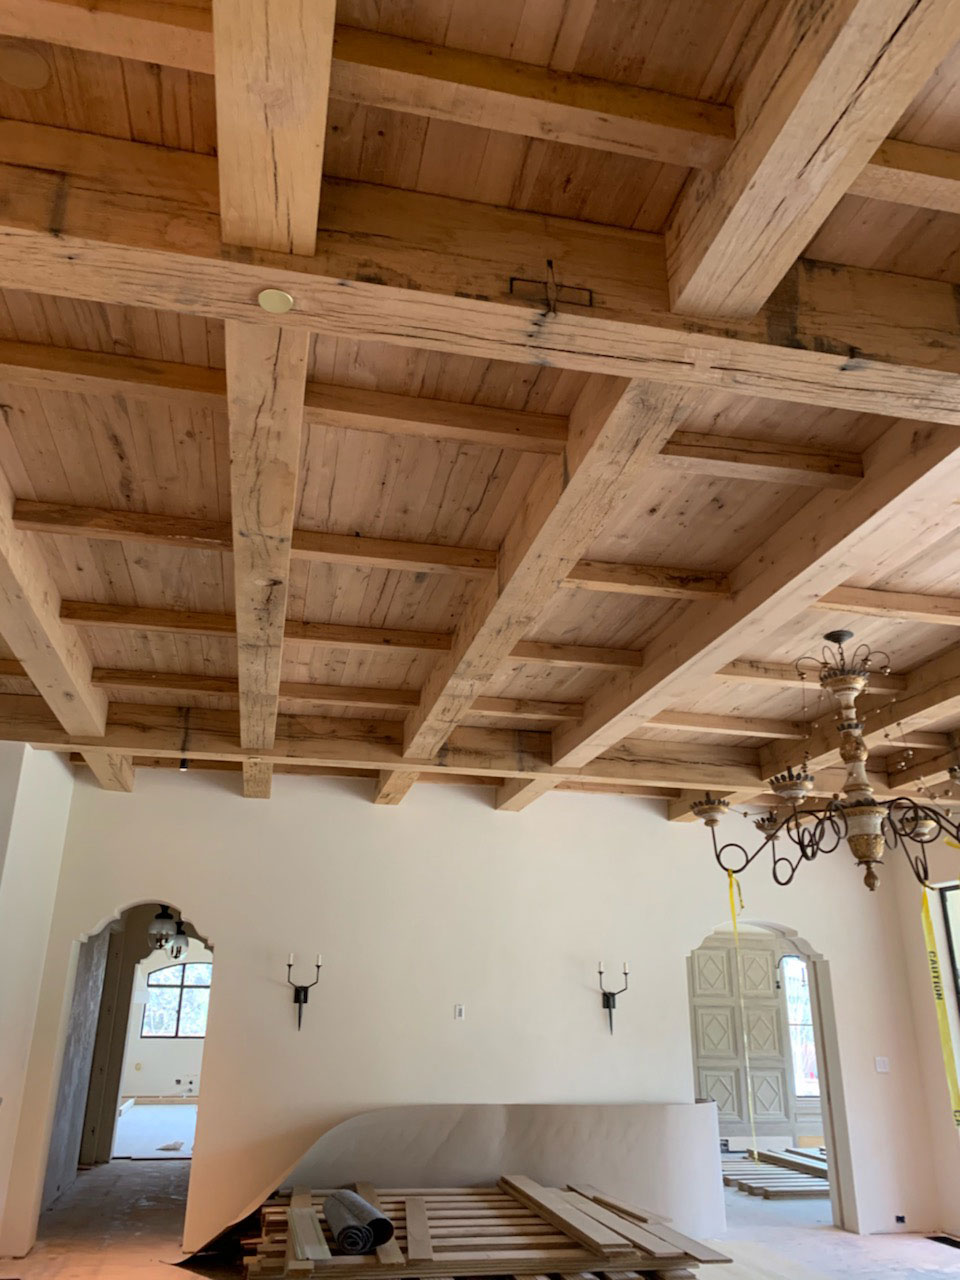 Triple B Enterprises The Reclaimed Timber Company Beams - Your Source For Hand-Hewn Two-Sided Sleepers